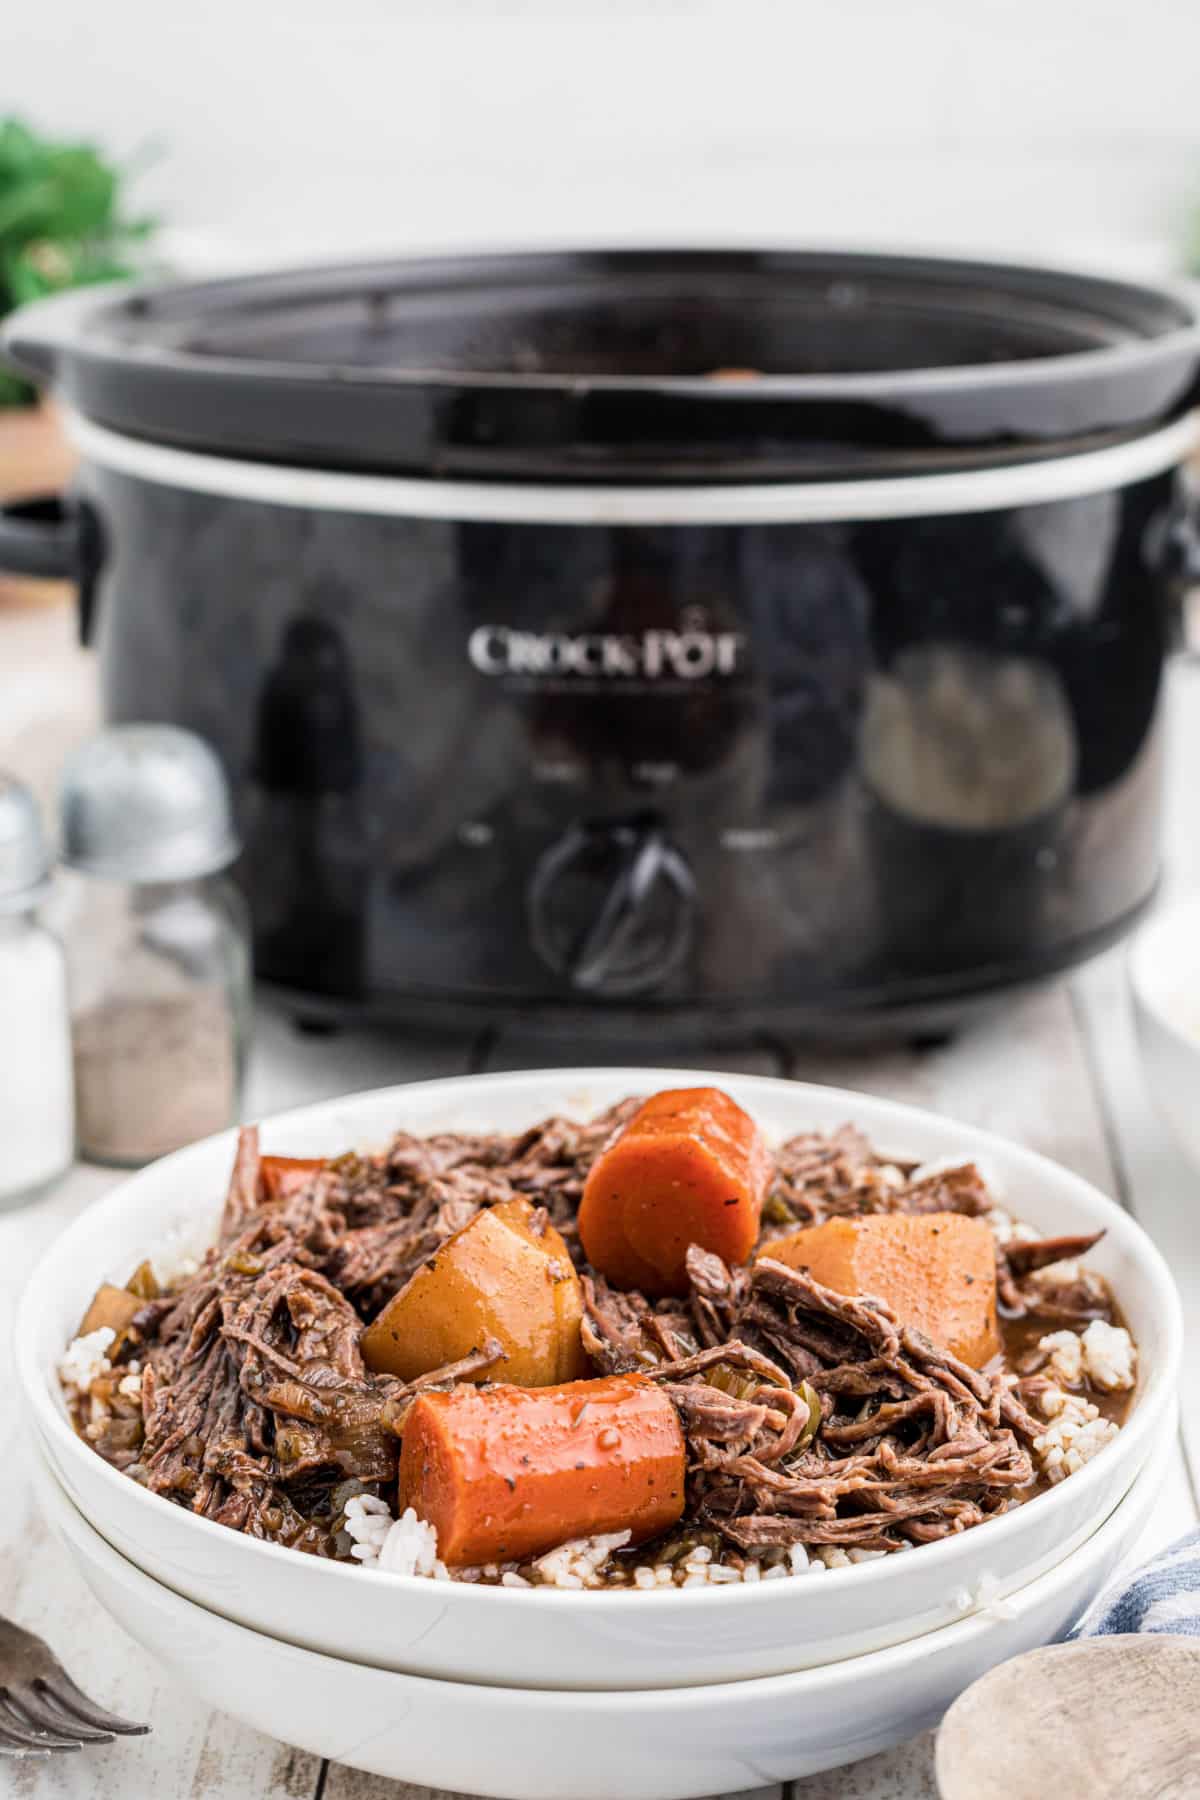 https://thecaglediaries.com/wp-content/uploads/2023/02/Slow-Cooker-Venison-Roast-with-Red-Wine-Hero-3.jpg